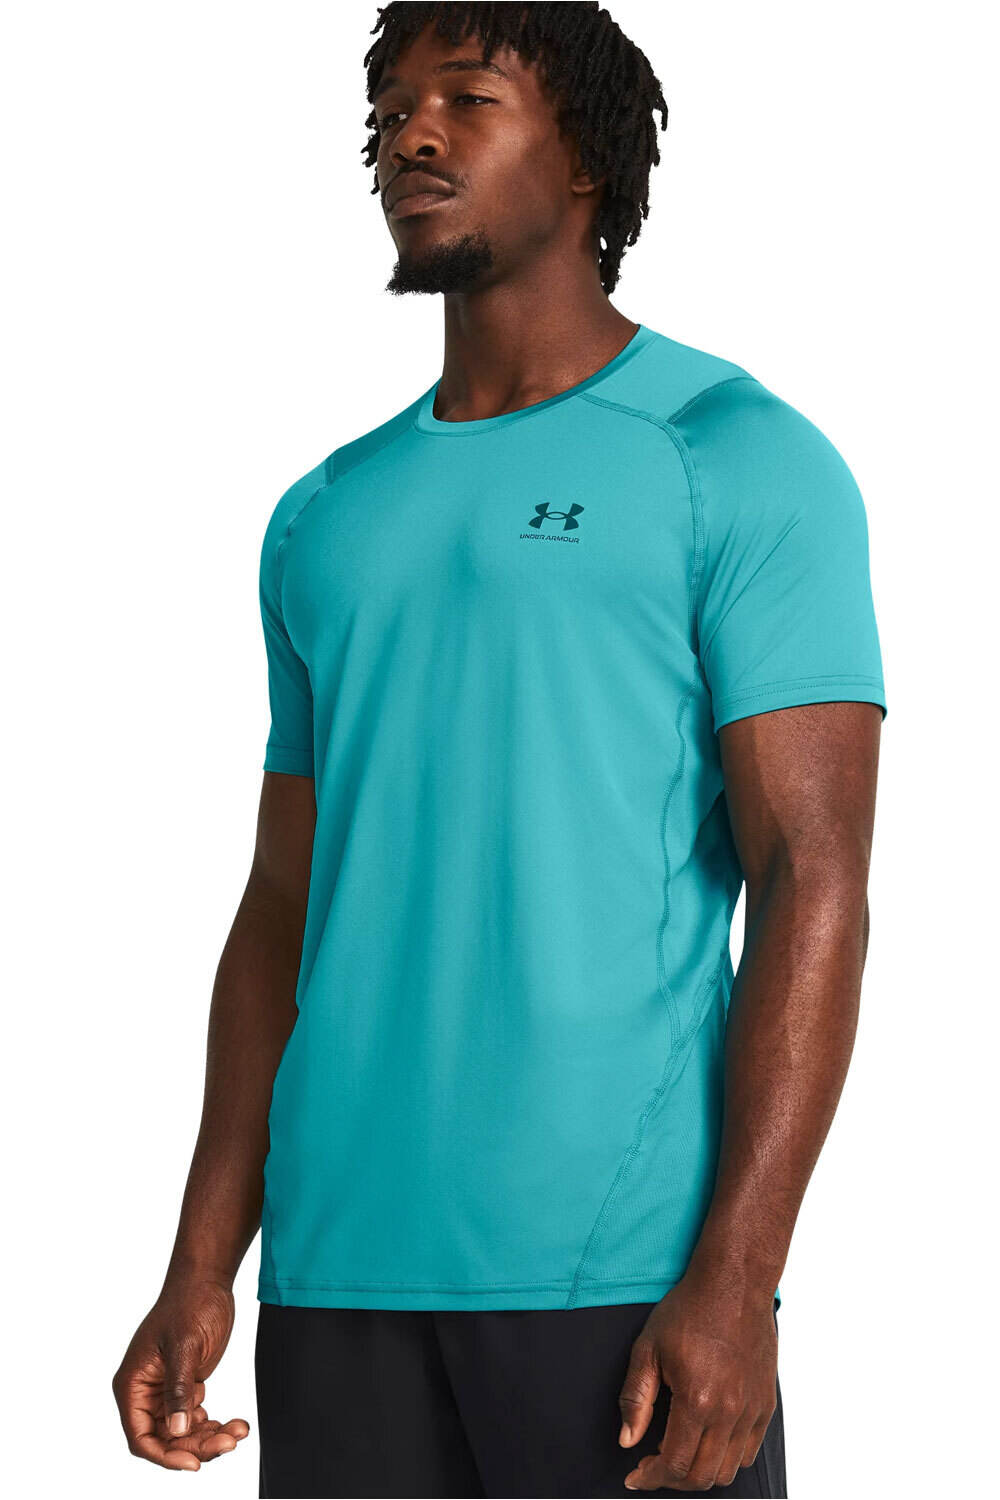 Under Armour camiseta fitness hombre UA HG Armour Fitted SS vista frontal